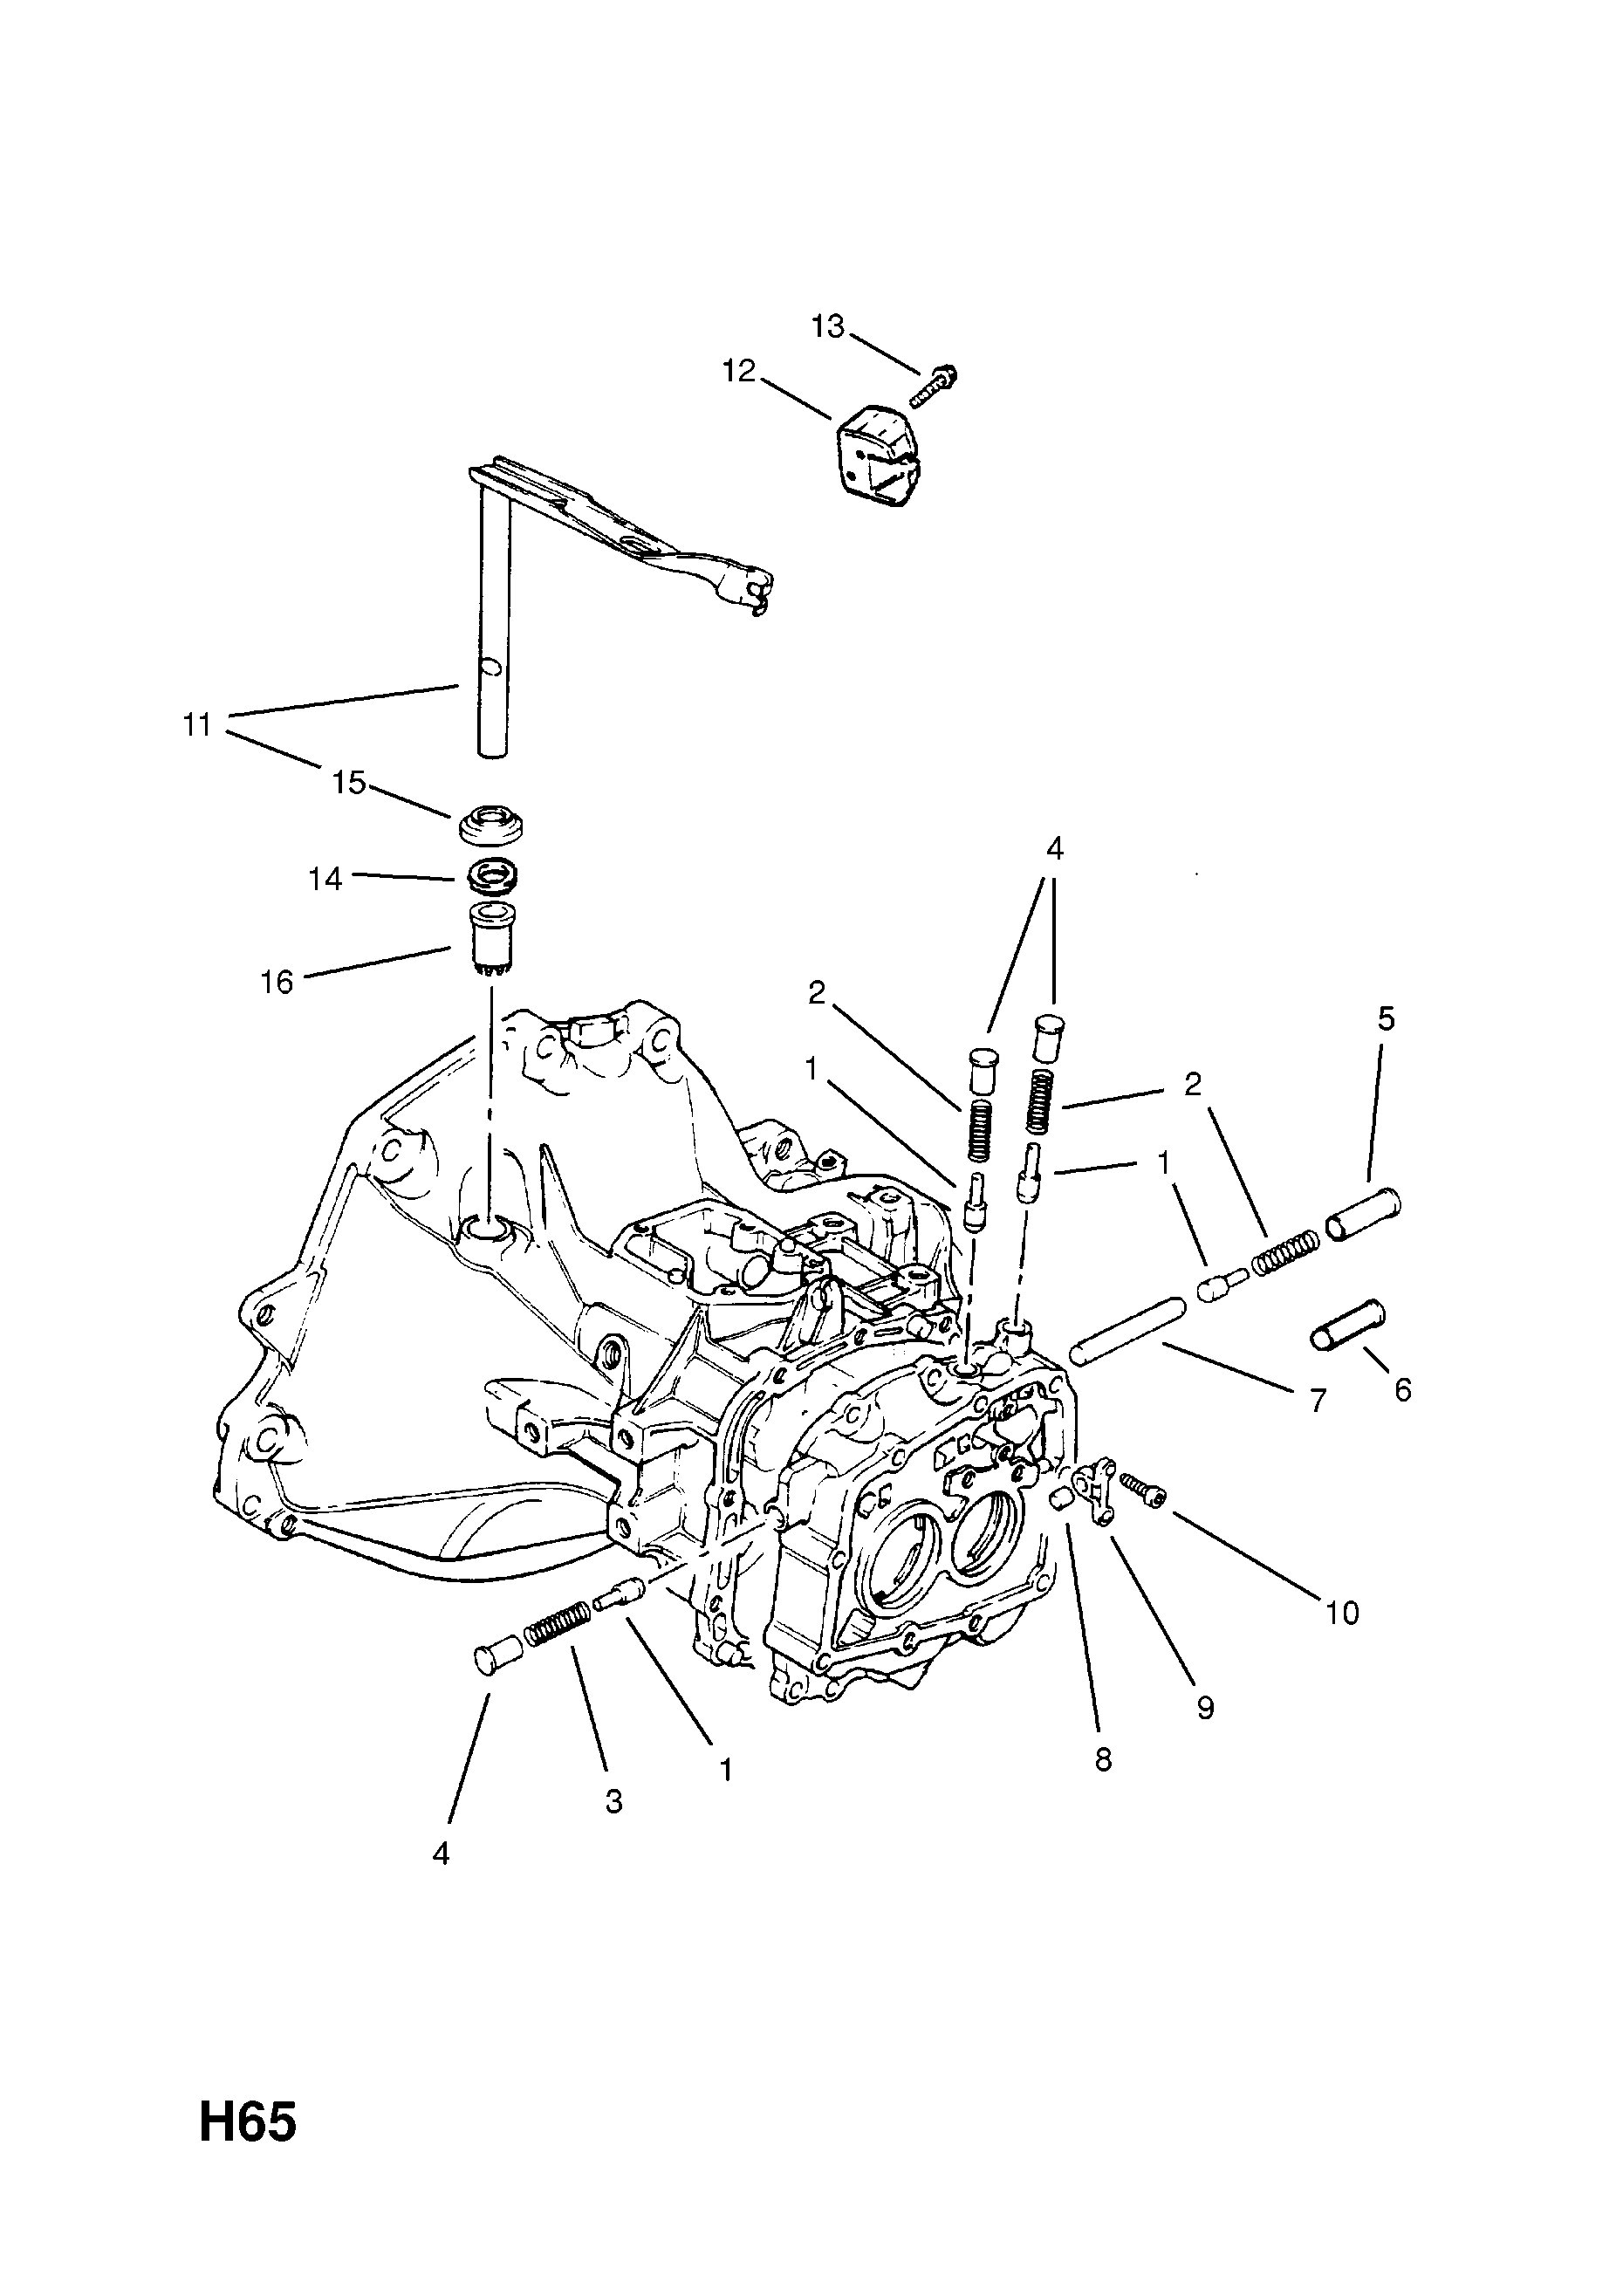 SELECTOR SHAFT AND FORK (CONTD.)